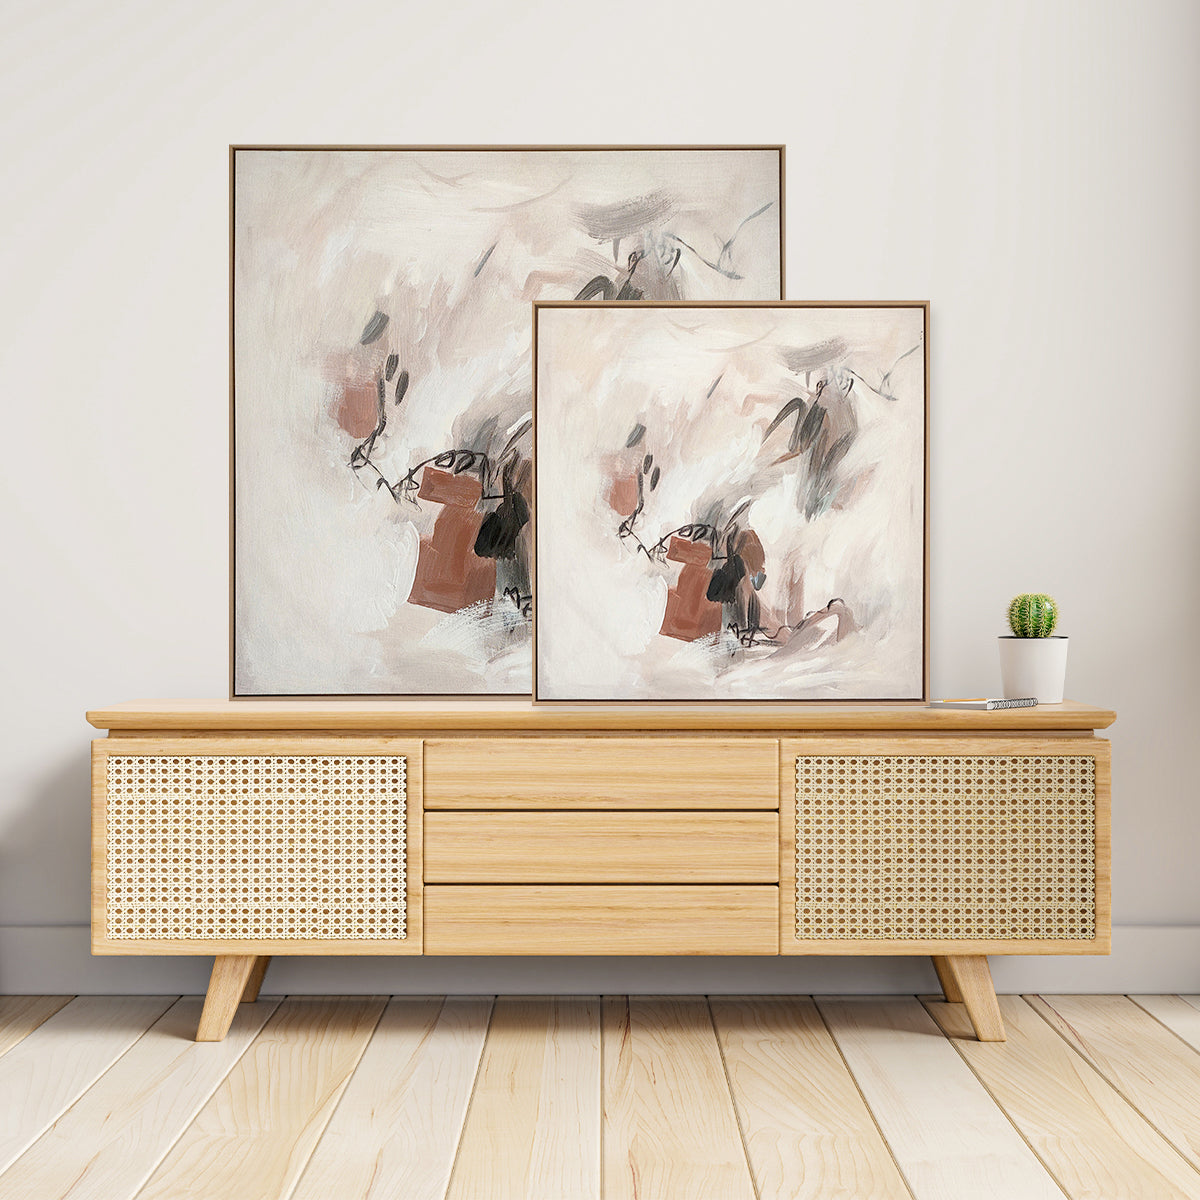 Abstract textured wall art affordable oil painting framed in two sizes brown square